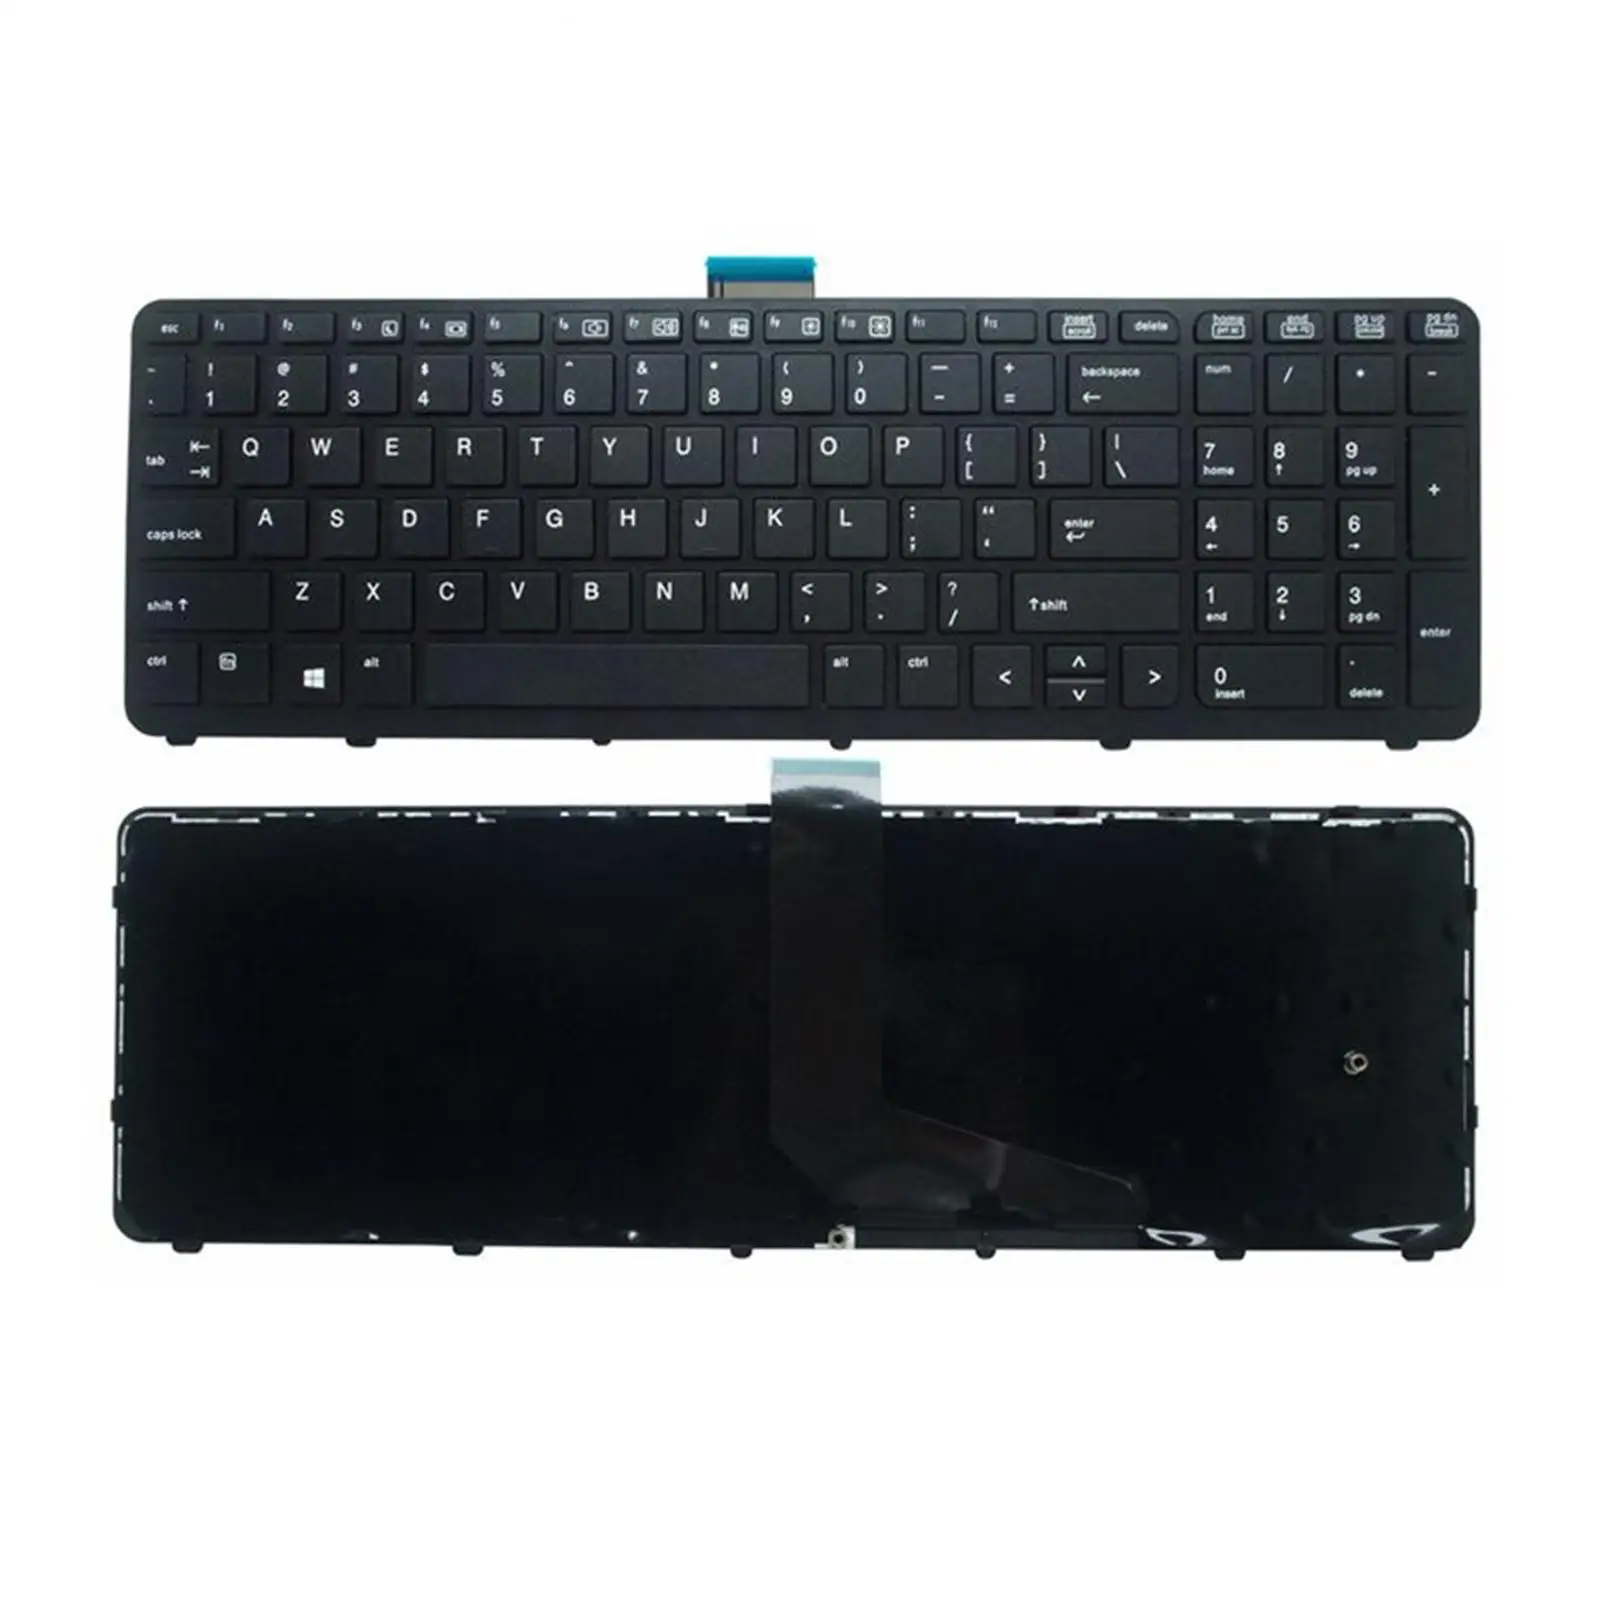 Laptop Keyboard US Layout Durable Black US English 733688-001 for HP Zbook 15 17 G1 G2 G3